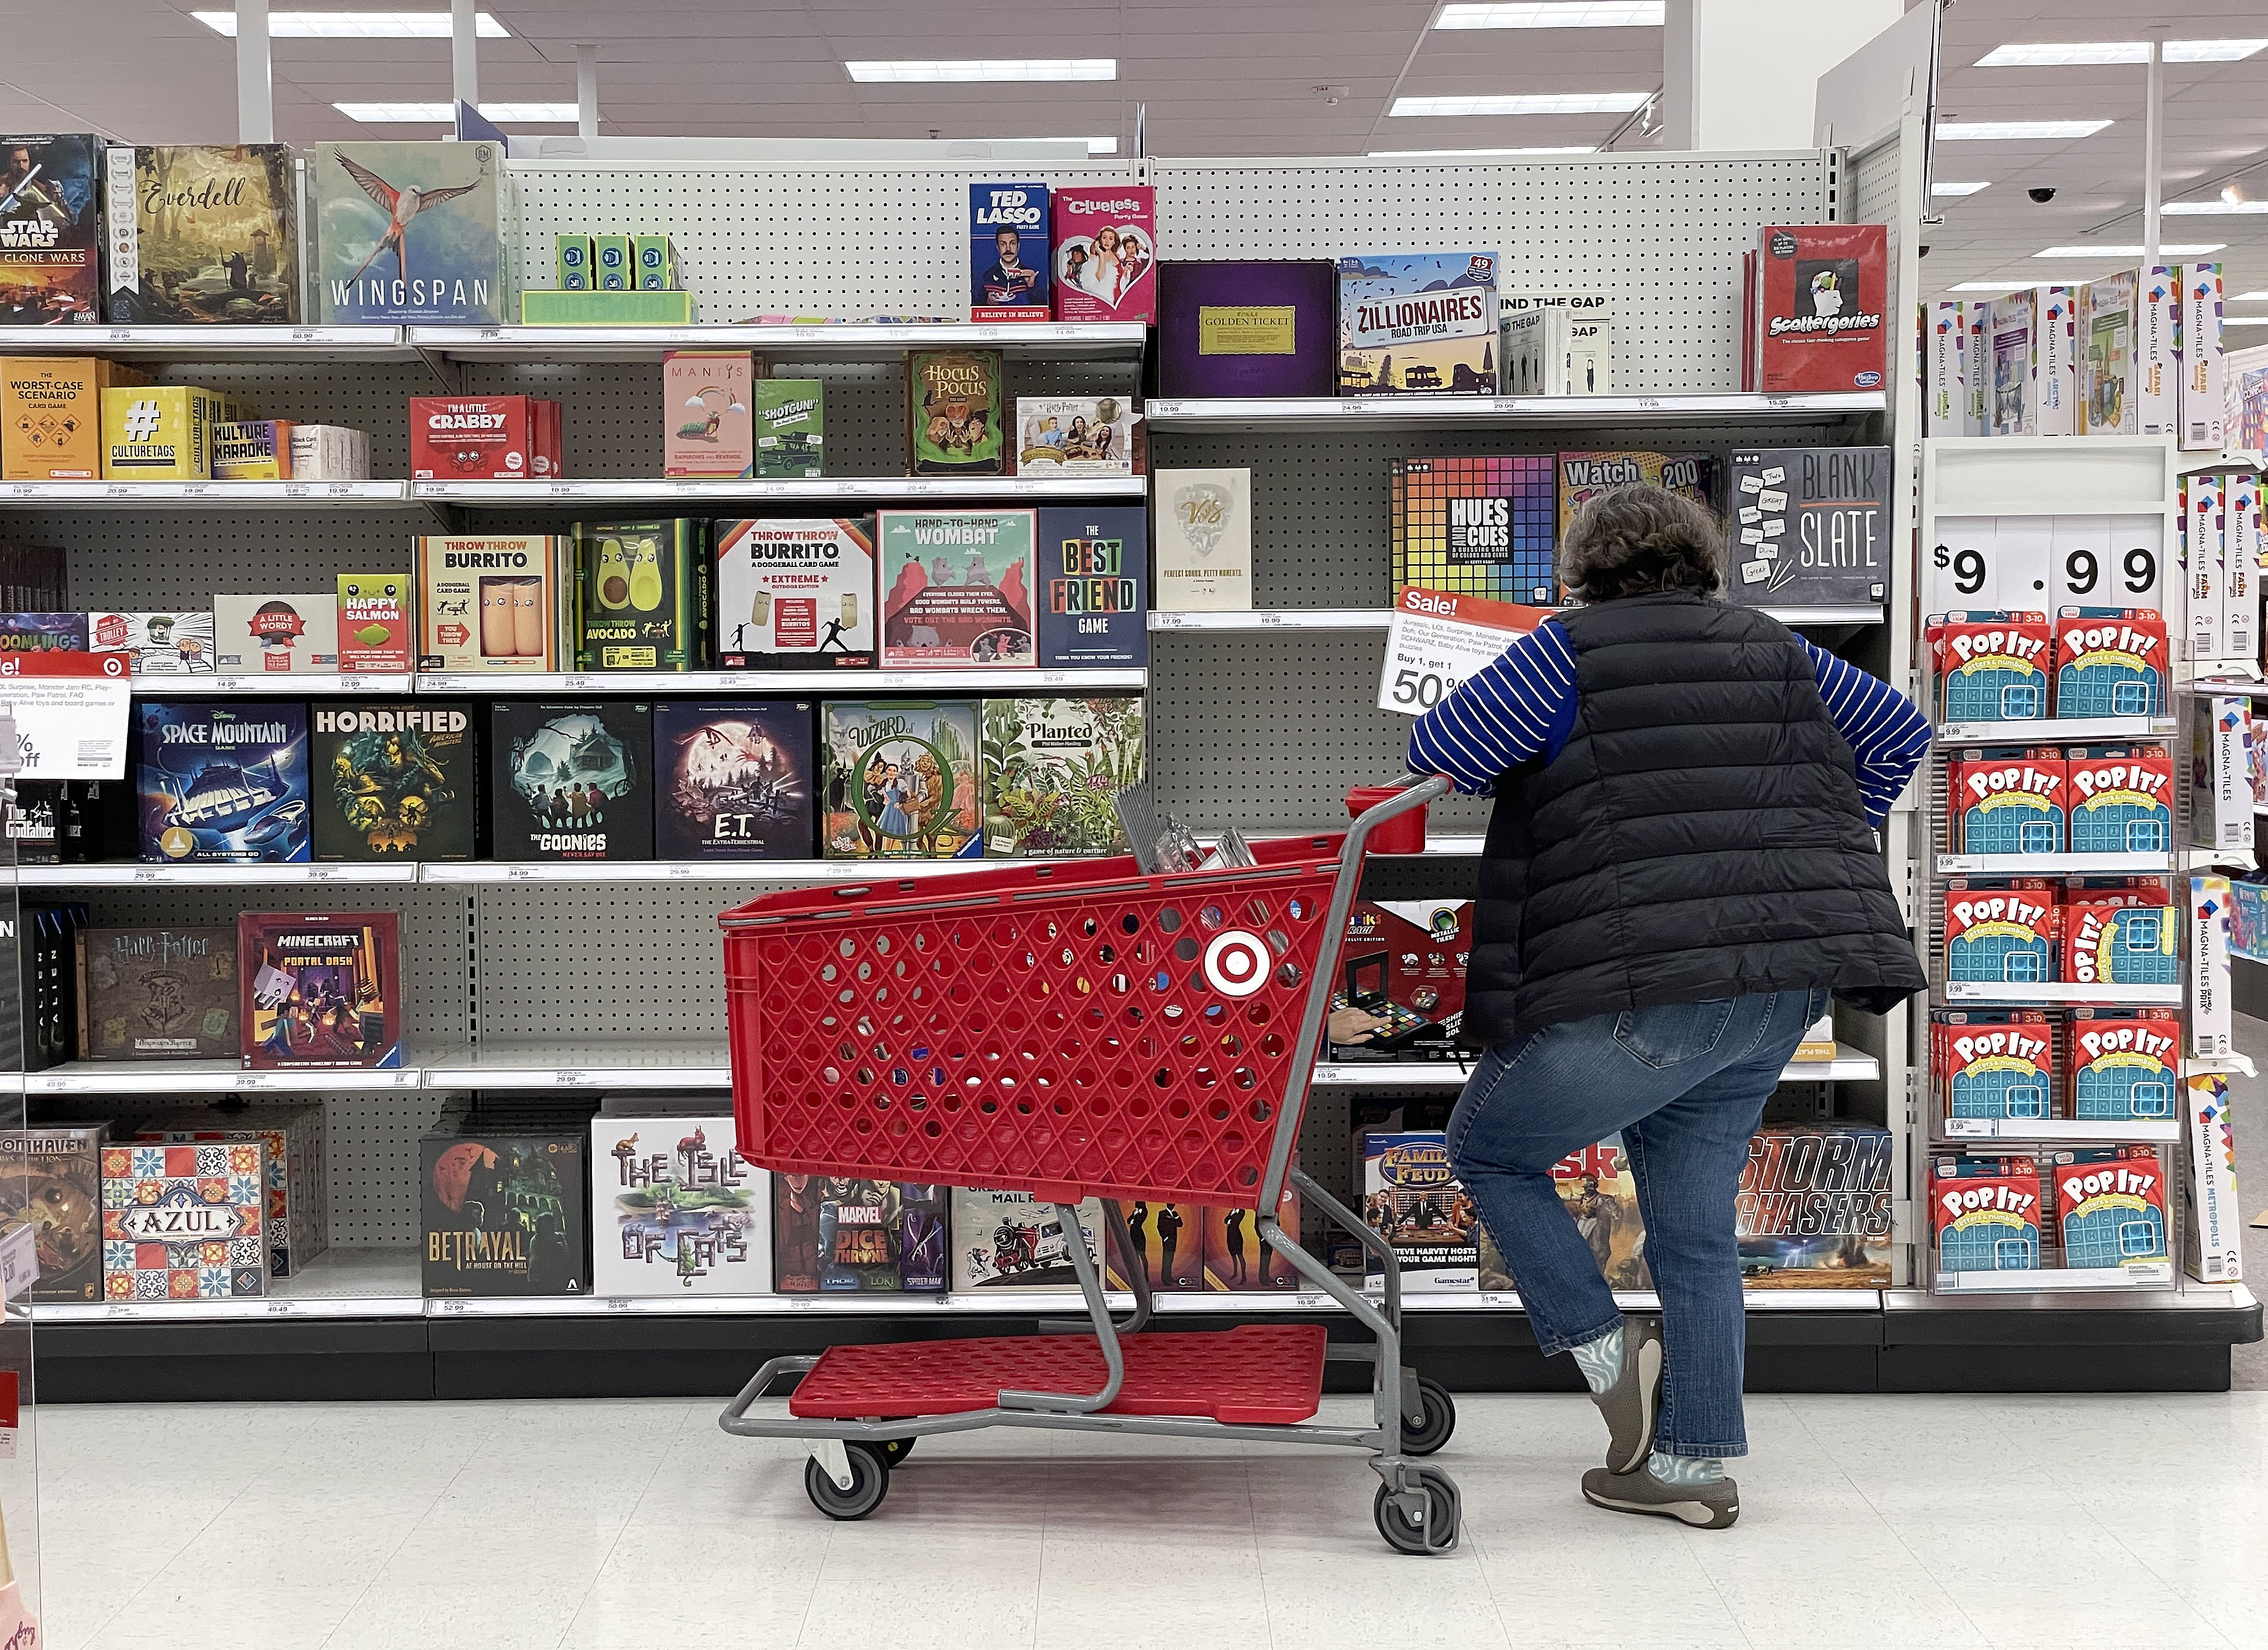 Target is poised to benefit from Bed Bath & Beyond's demise, Oppenheimer says